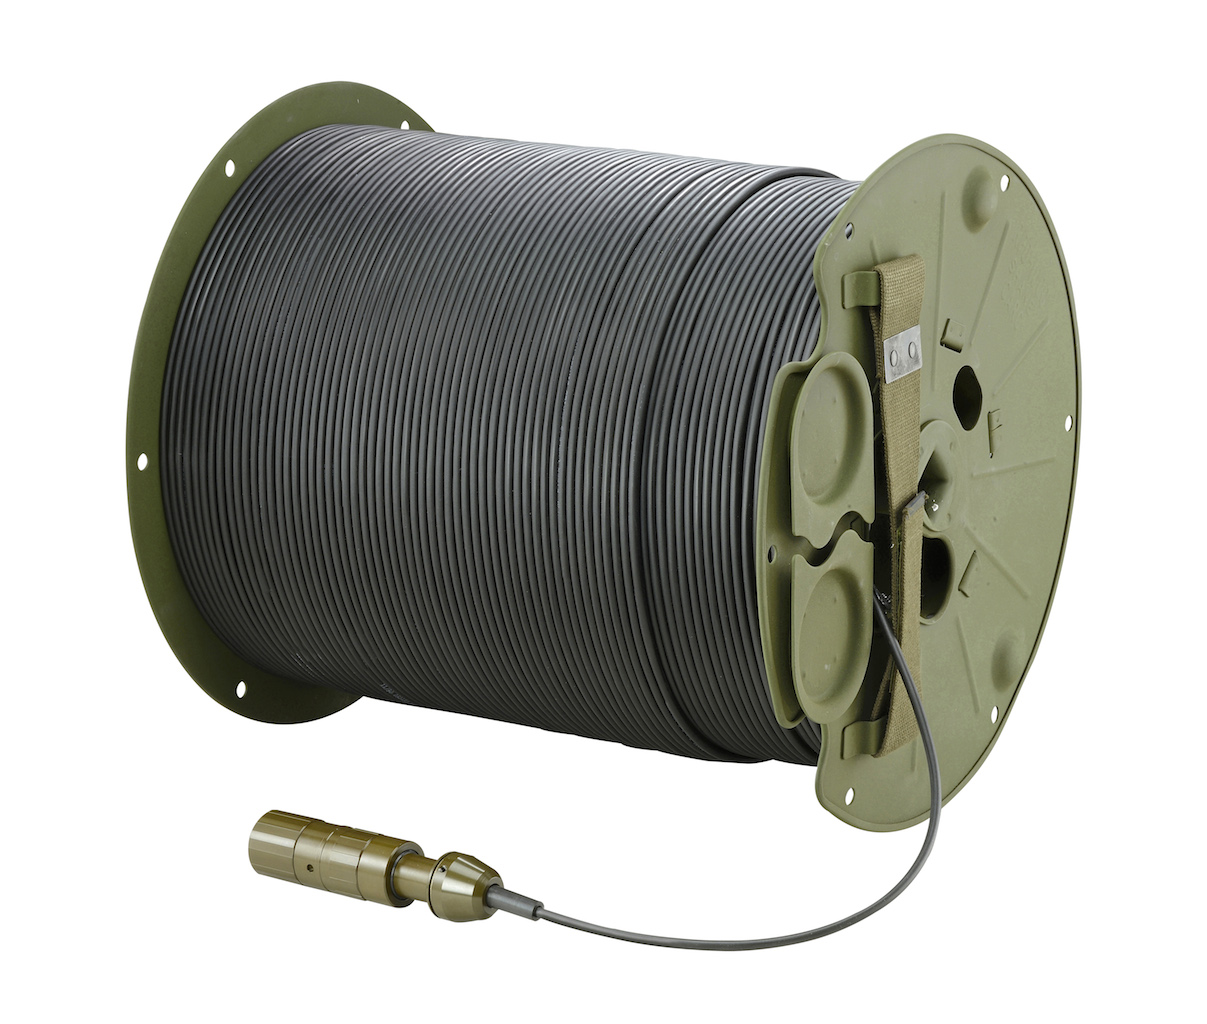 Handle Small Cable Reel For Armored Military Tactical Fiber Optic  Cable,Handle Small Cable Reel For Armored Military Tacti,Shenzhen Homk  Telecom Tech Co., Ltd.